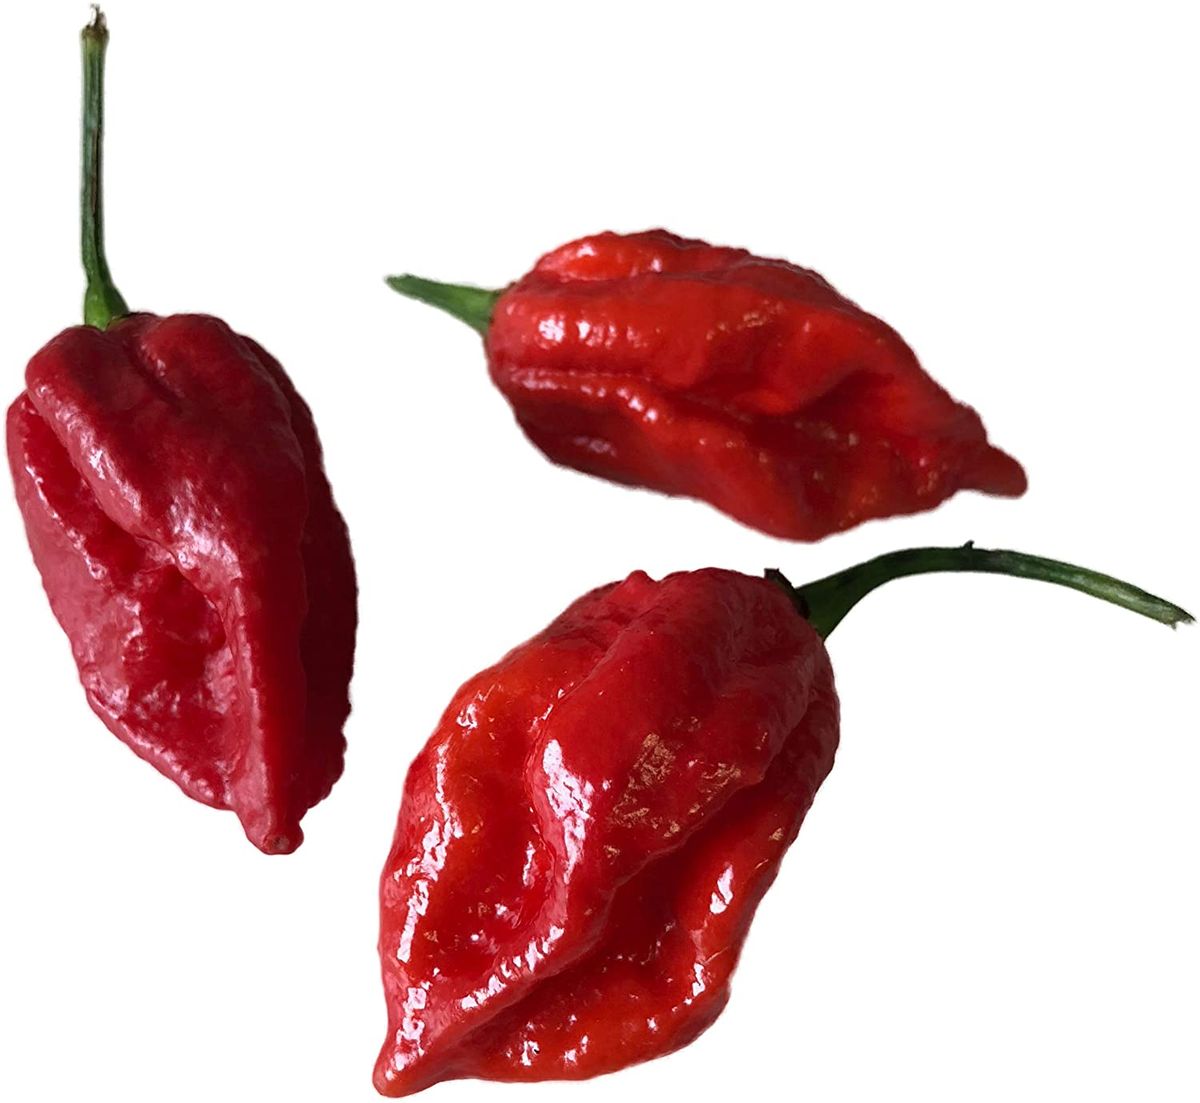 World's Hottest Chilli Peppers